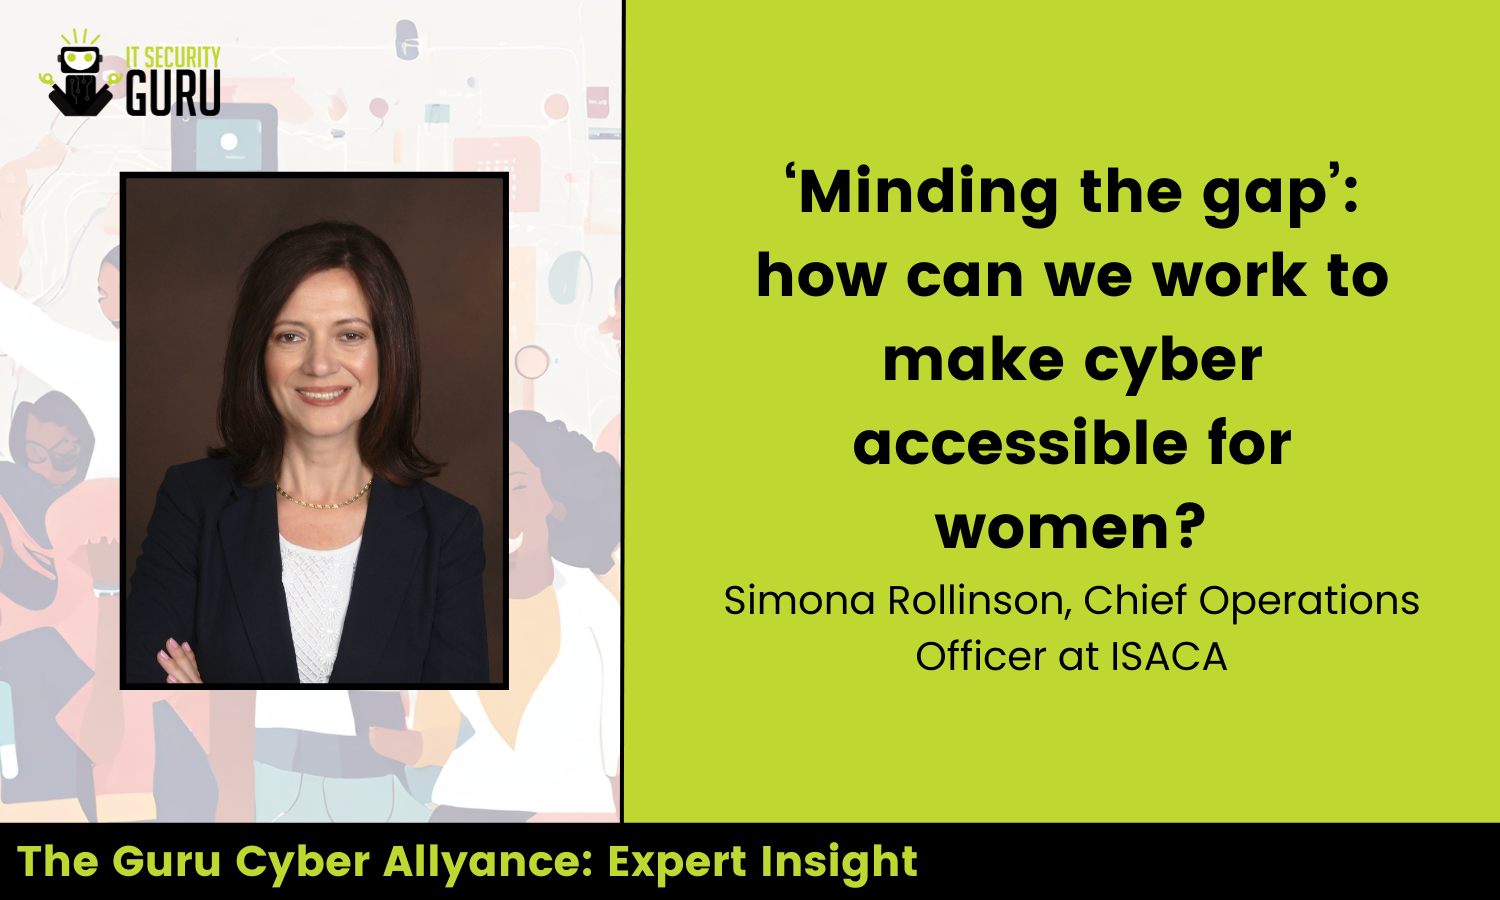 Expert Insight: ‘Minding the gap’: how can we work to make cyber accessible for women?